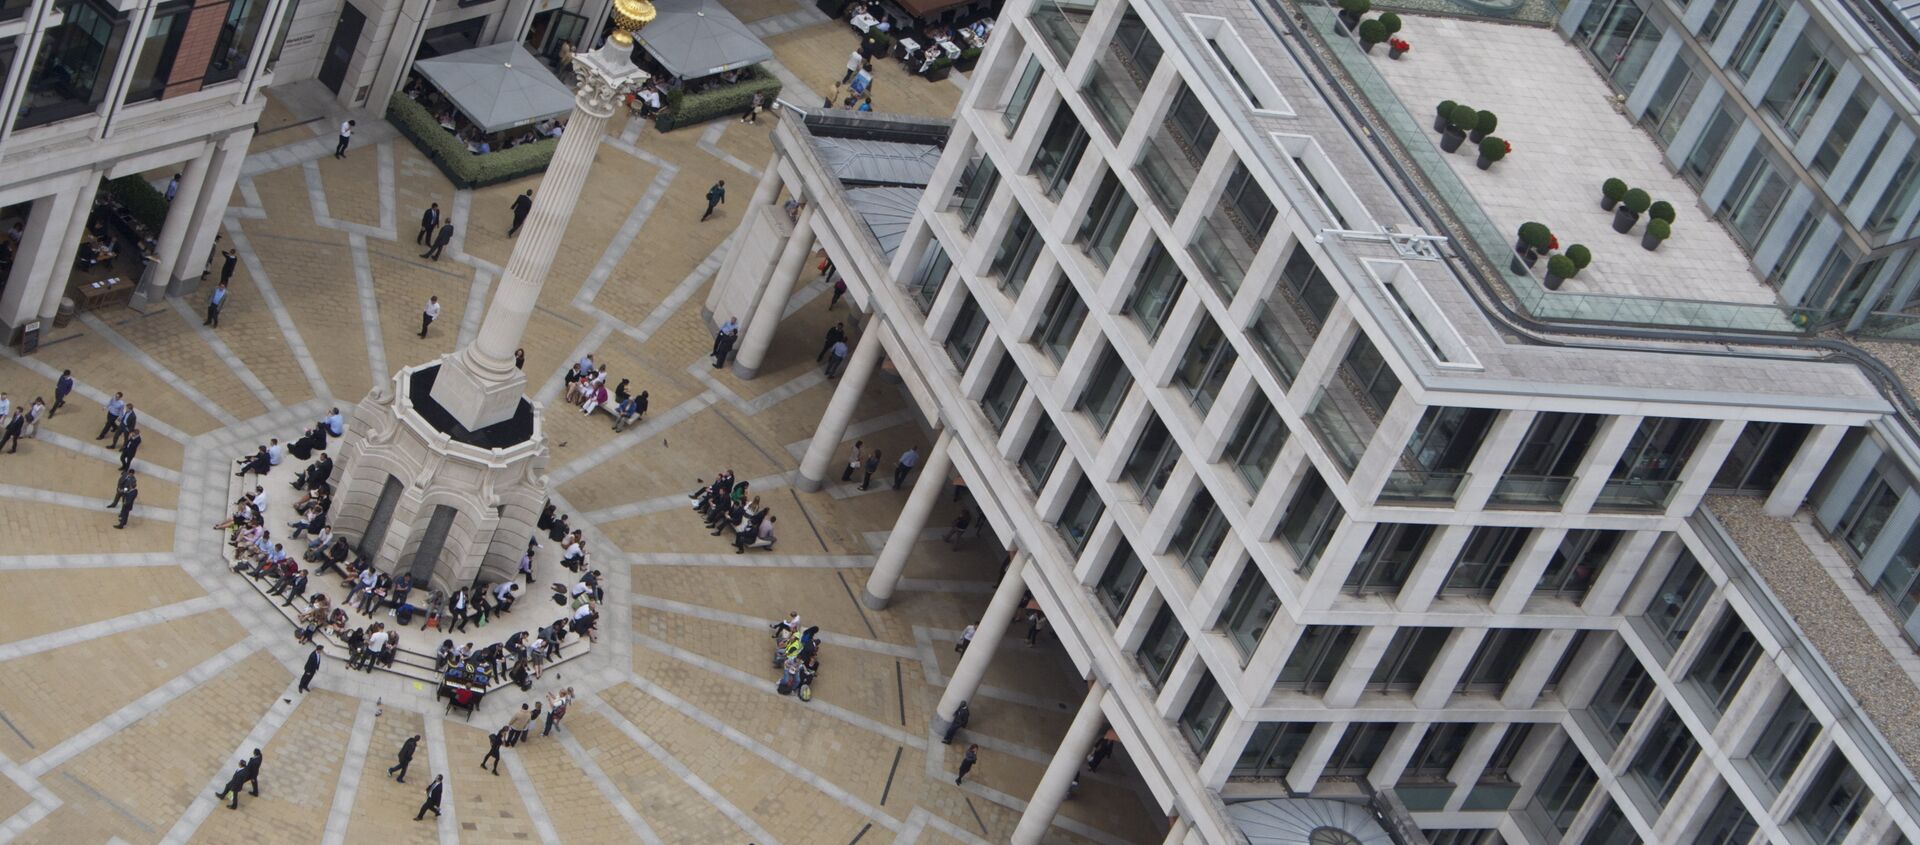 Paternoster Square as seen from St. Paul's Cathedral - London Stock Exchange - Sputnik International, 1920, 12.03.2021